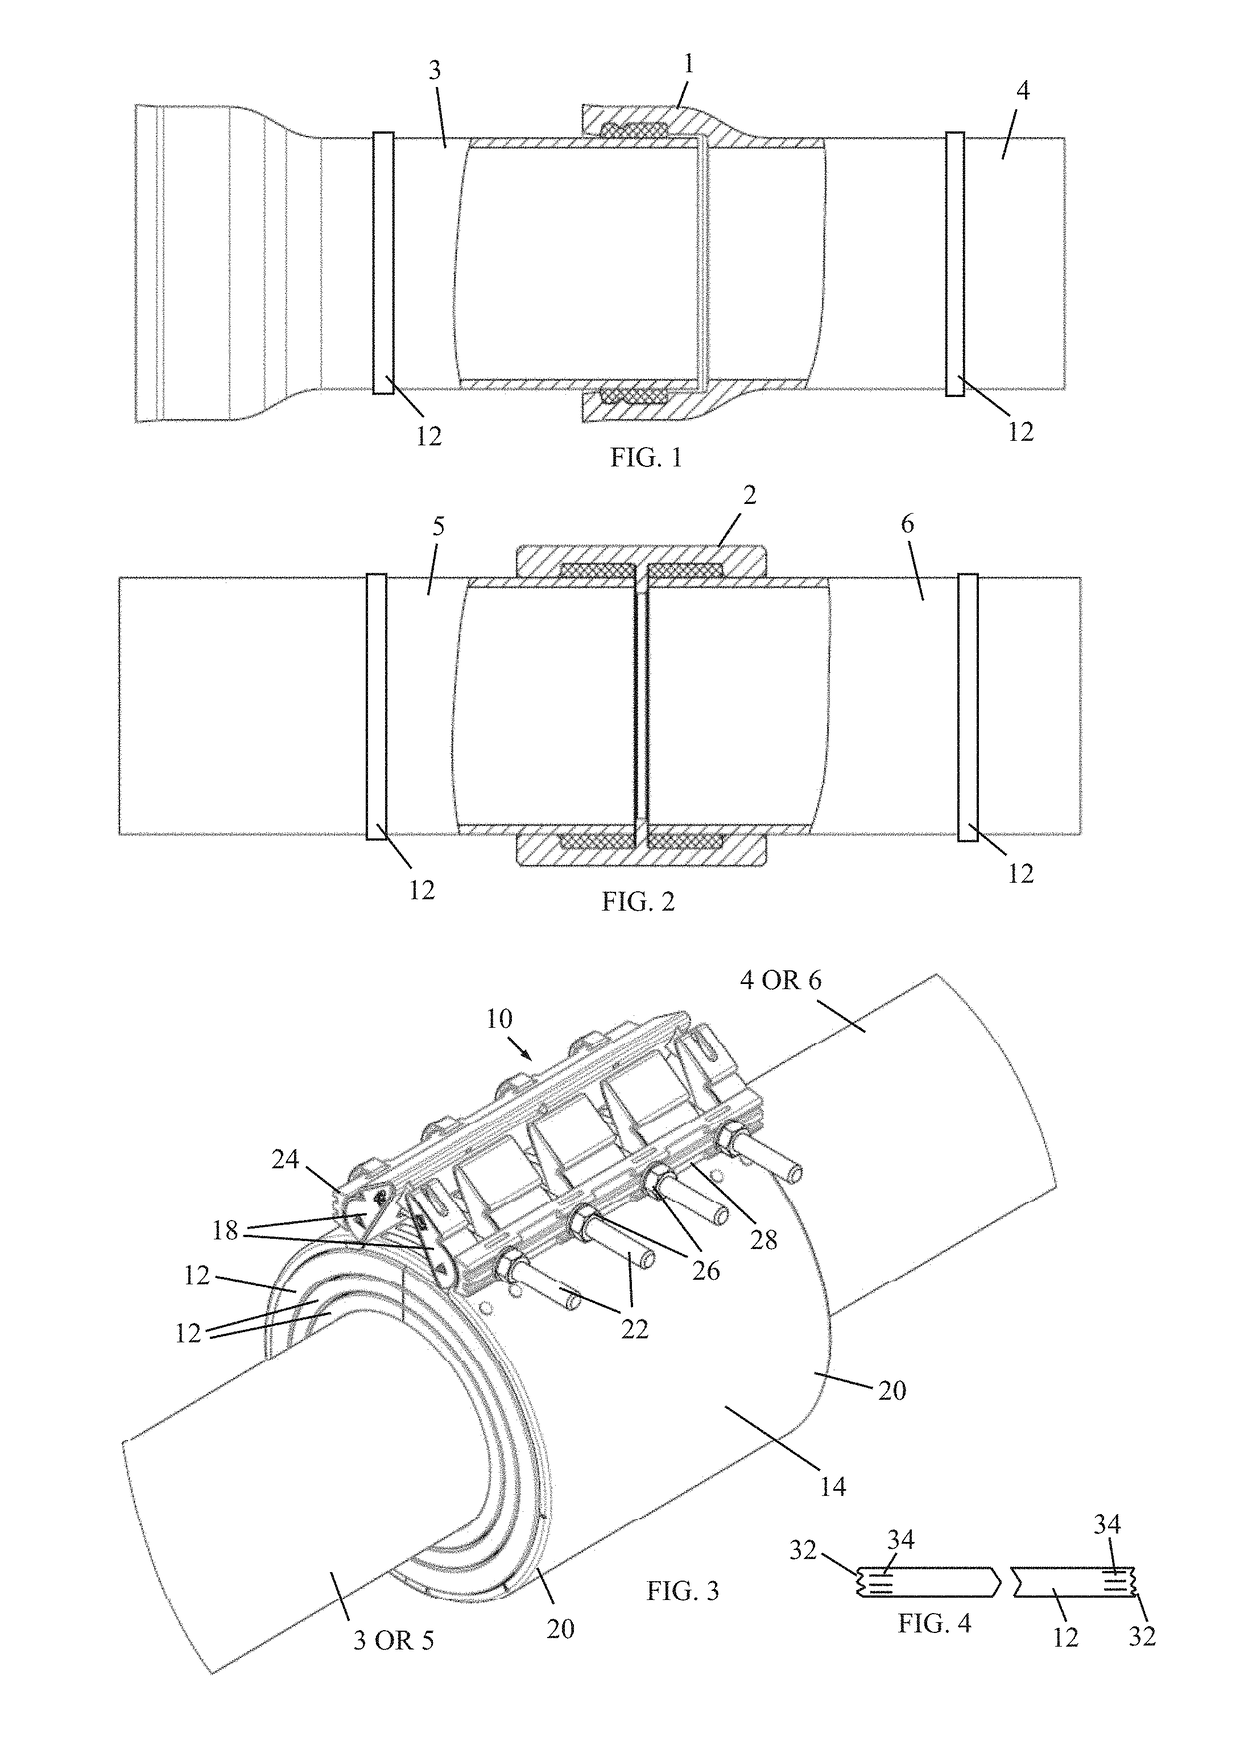 Method for pipe coupling encapsulation